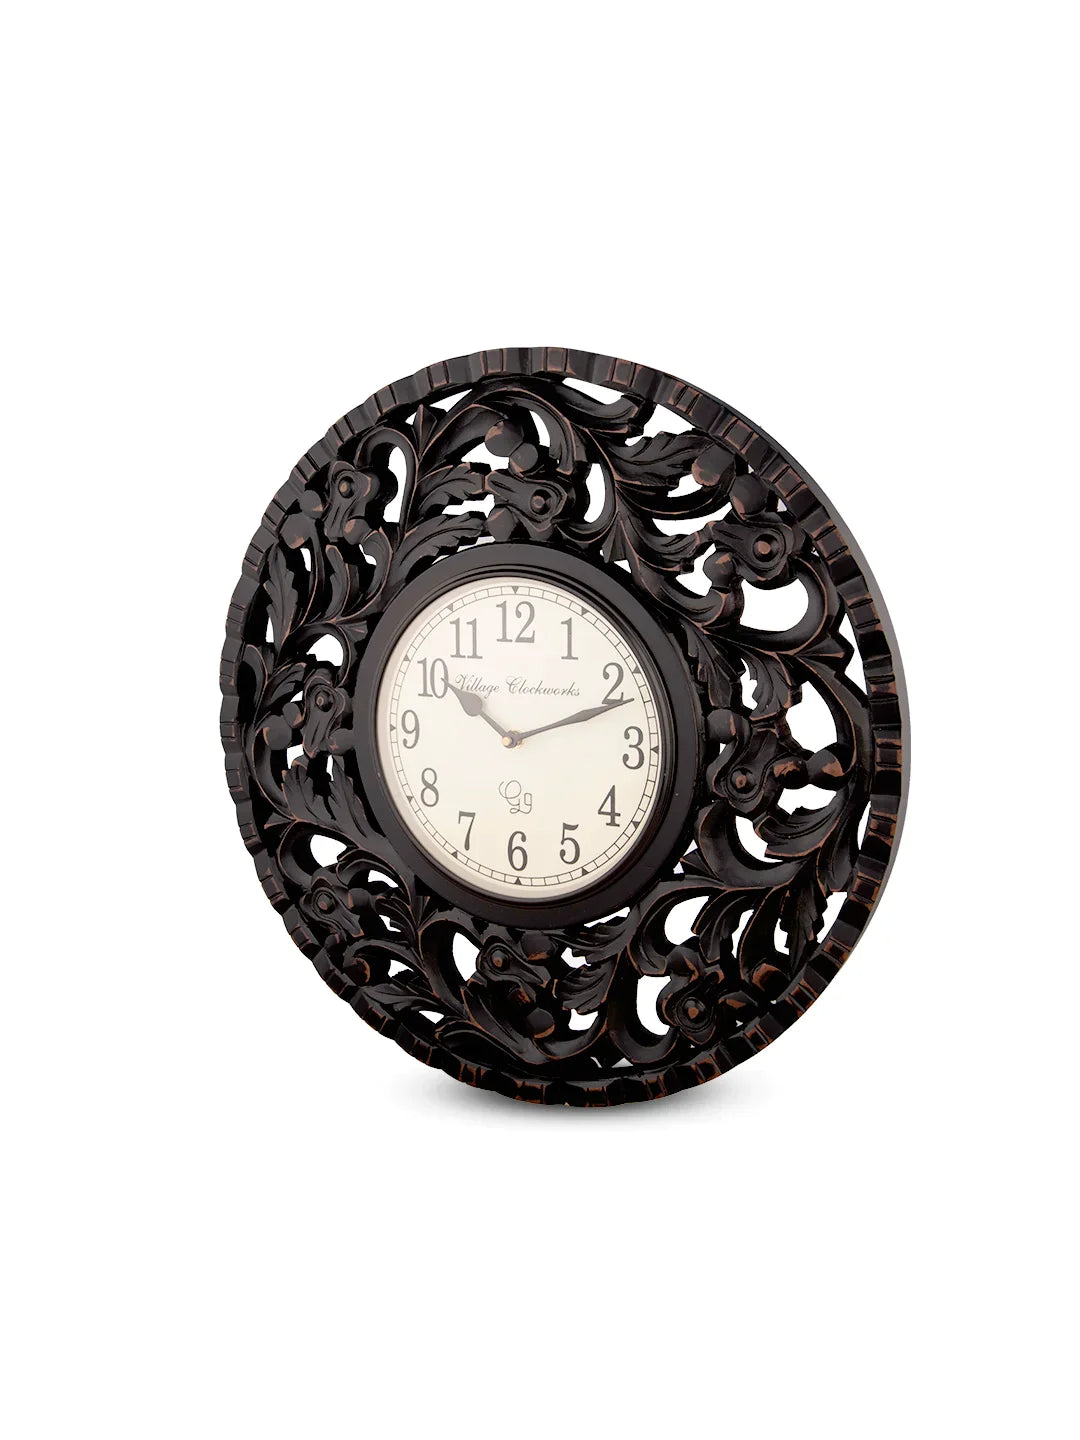 Round Wooden Flower Carving 18 Inches Analog Wall Clock